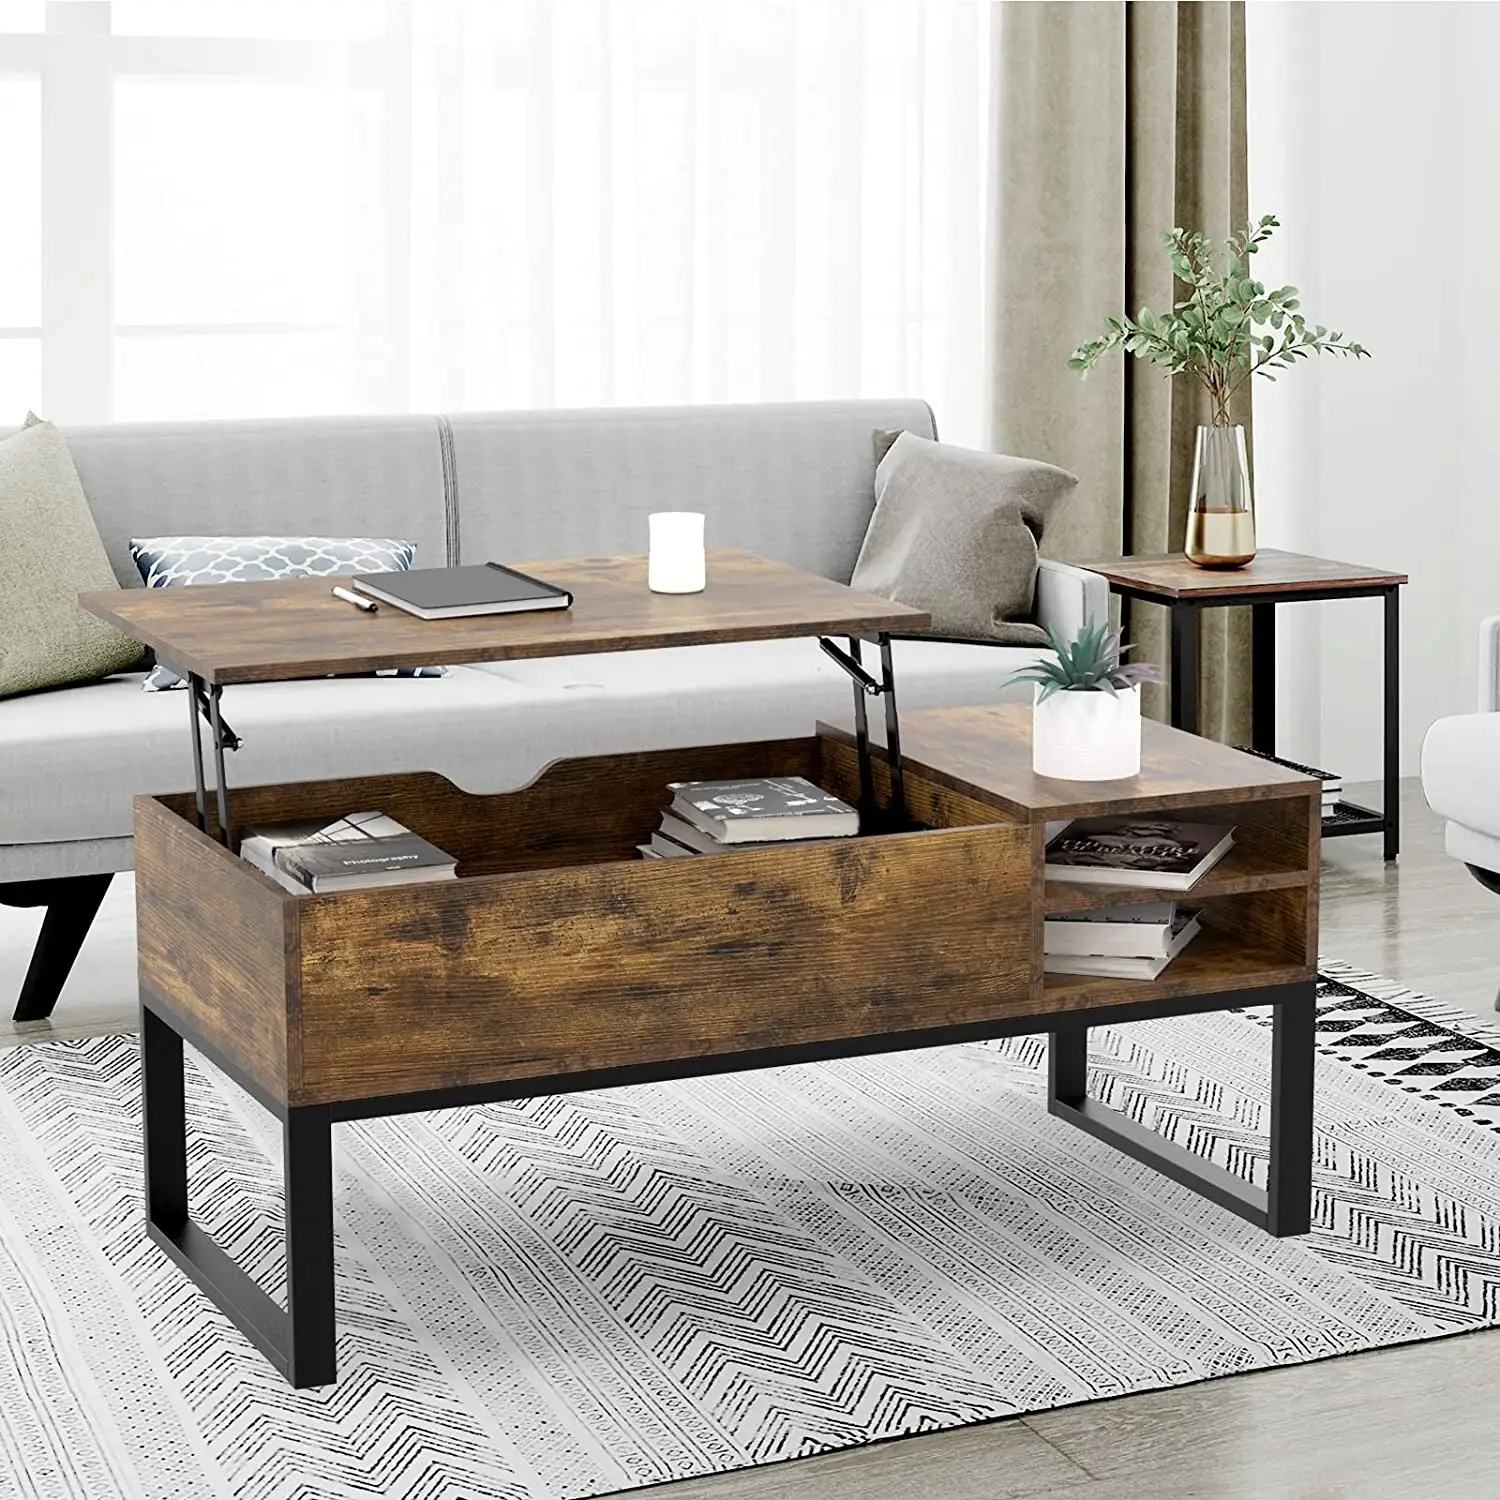 Lift Top with Storage Wood Square Modern Coffee Table for Home Living Room Office Rustic Brown Coffee Table